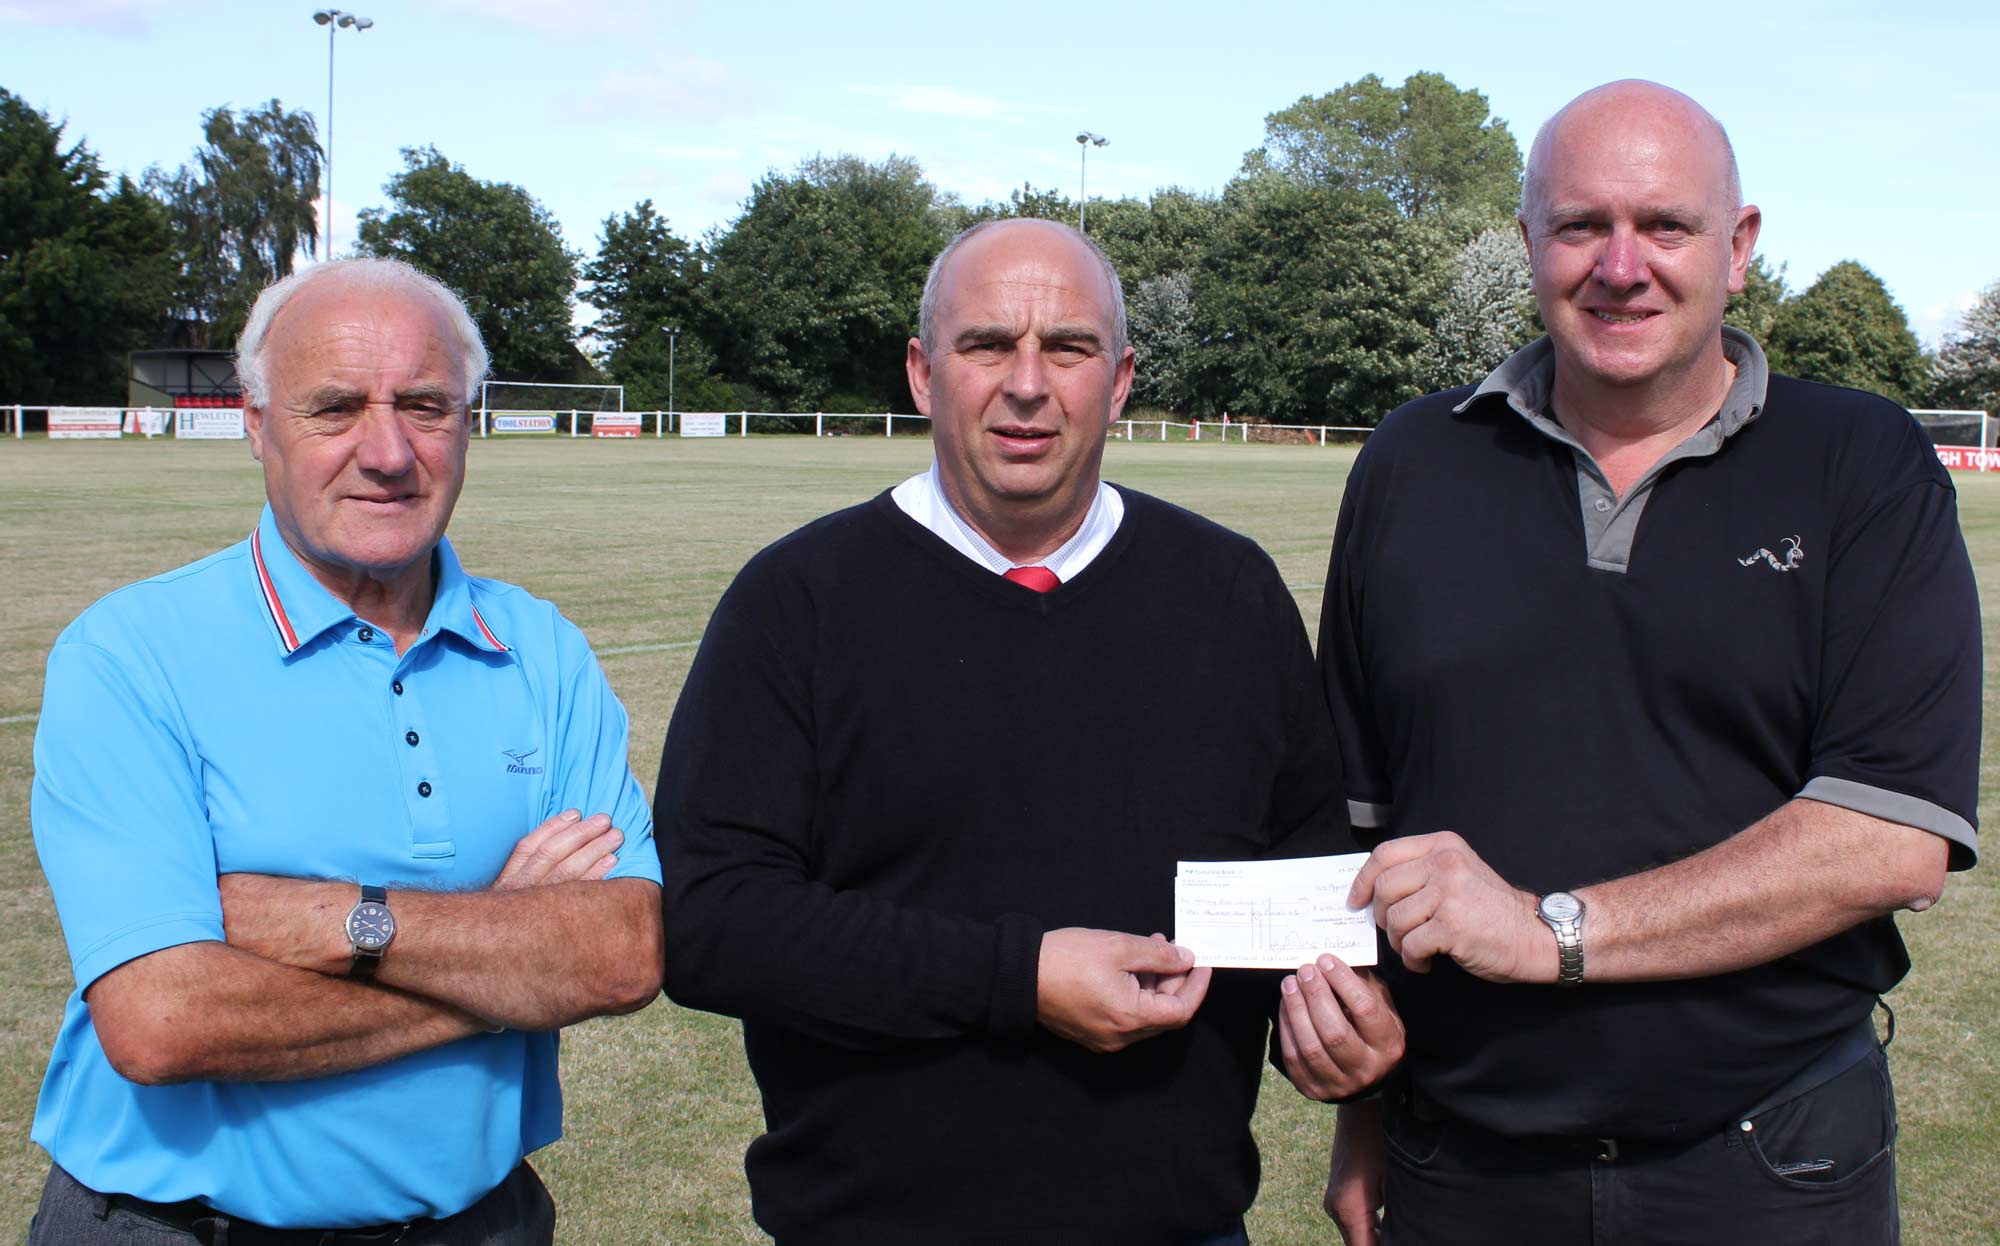 rian Clifford (Left) & Graham Gotts (Right) Being Presented With The Cheque By Knaresborough Town Chairman Peter Plews (Center)